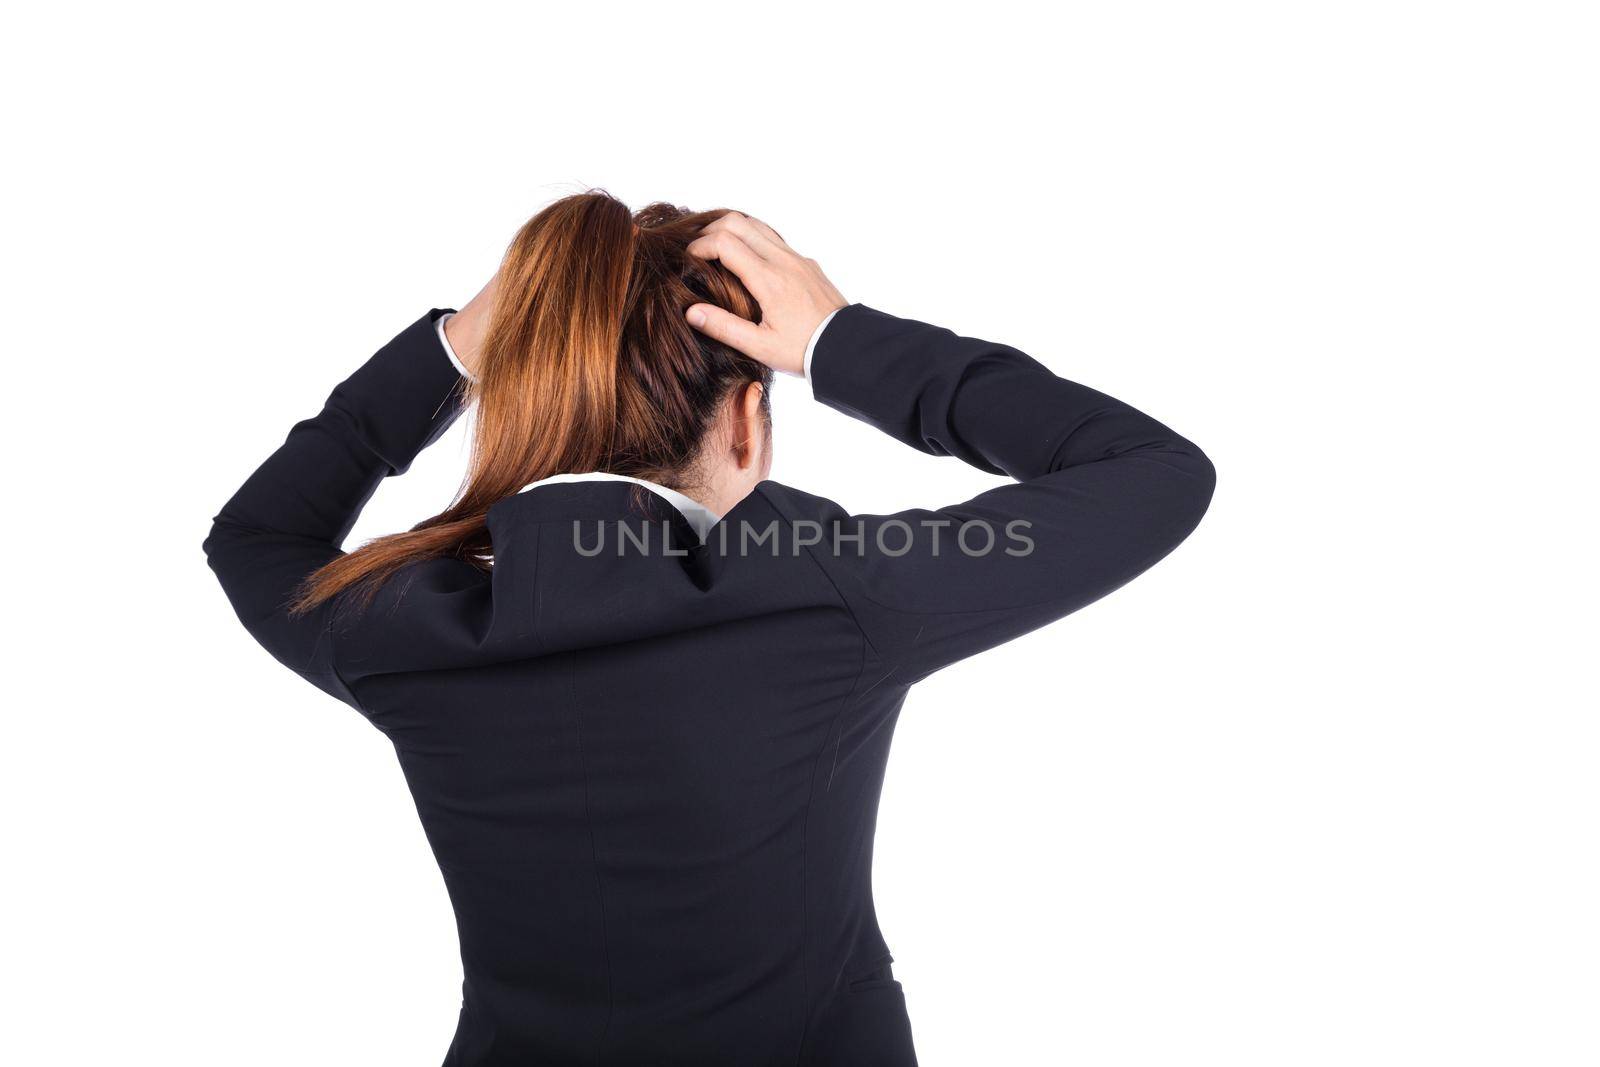 Worried business woman isolated on white background